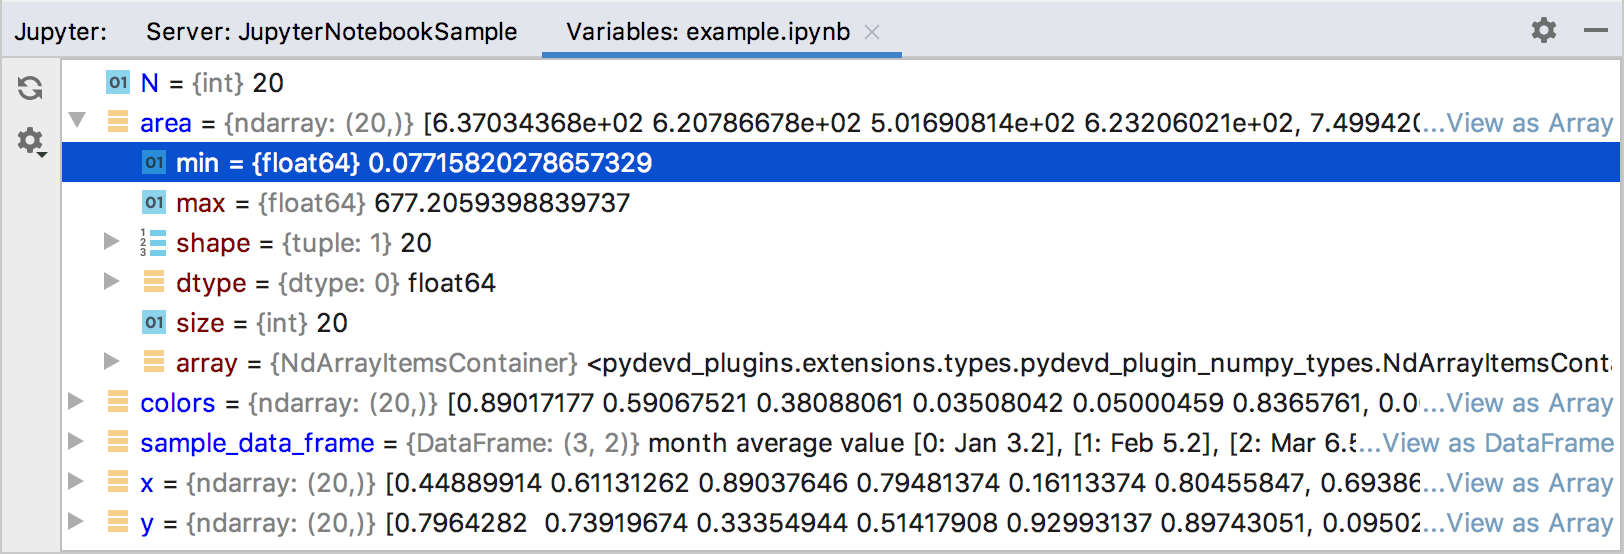 Jupyter server tool window: the Variables tab